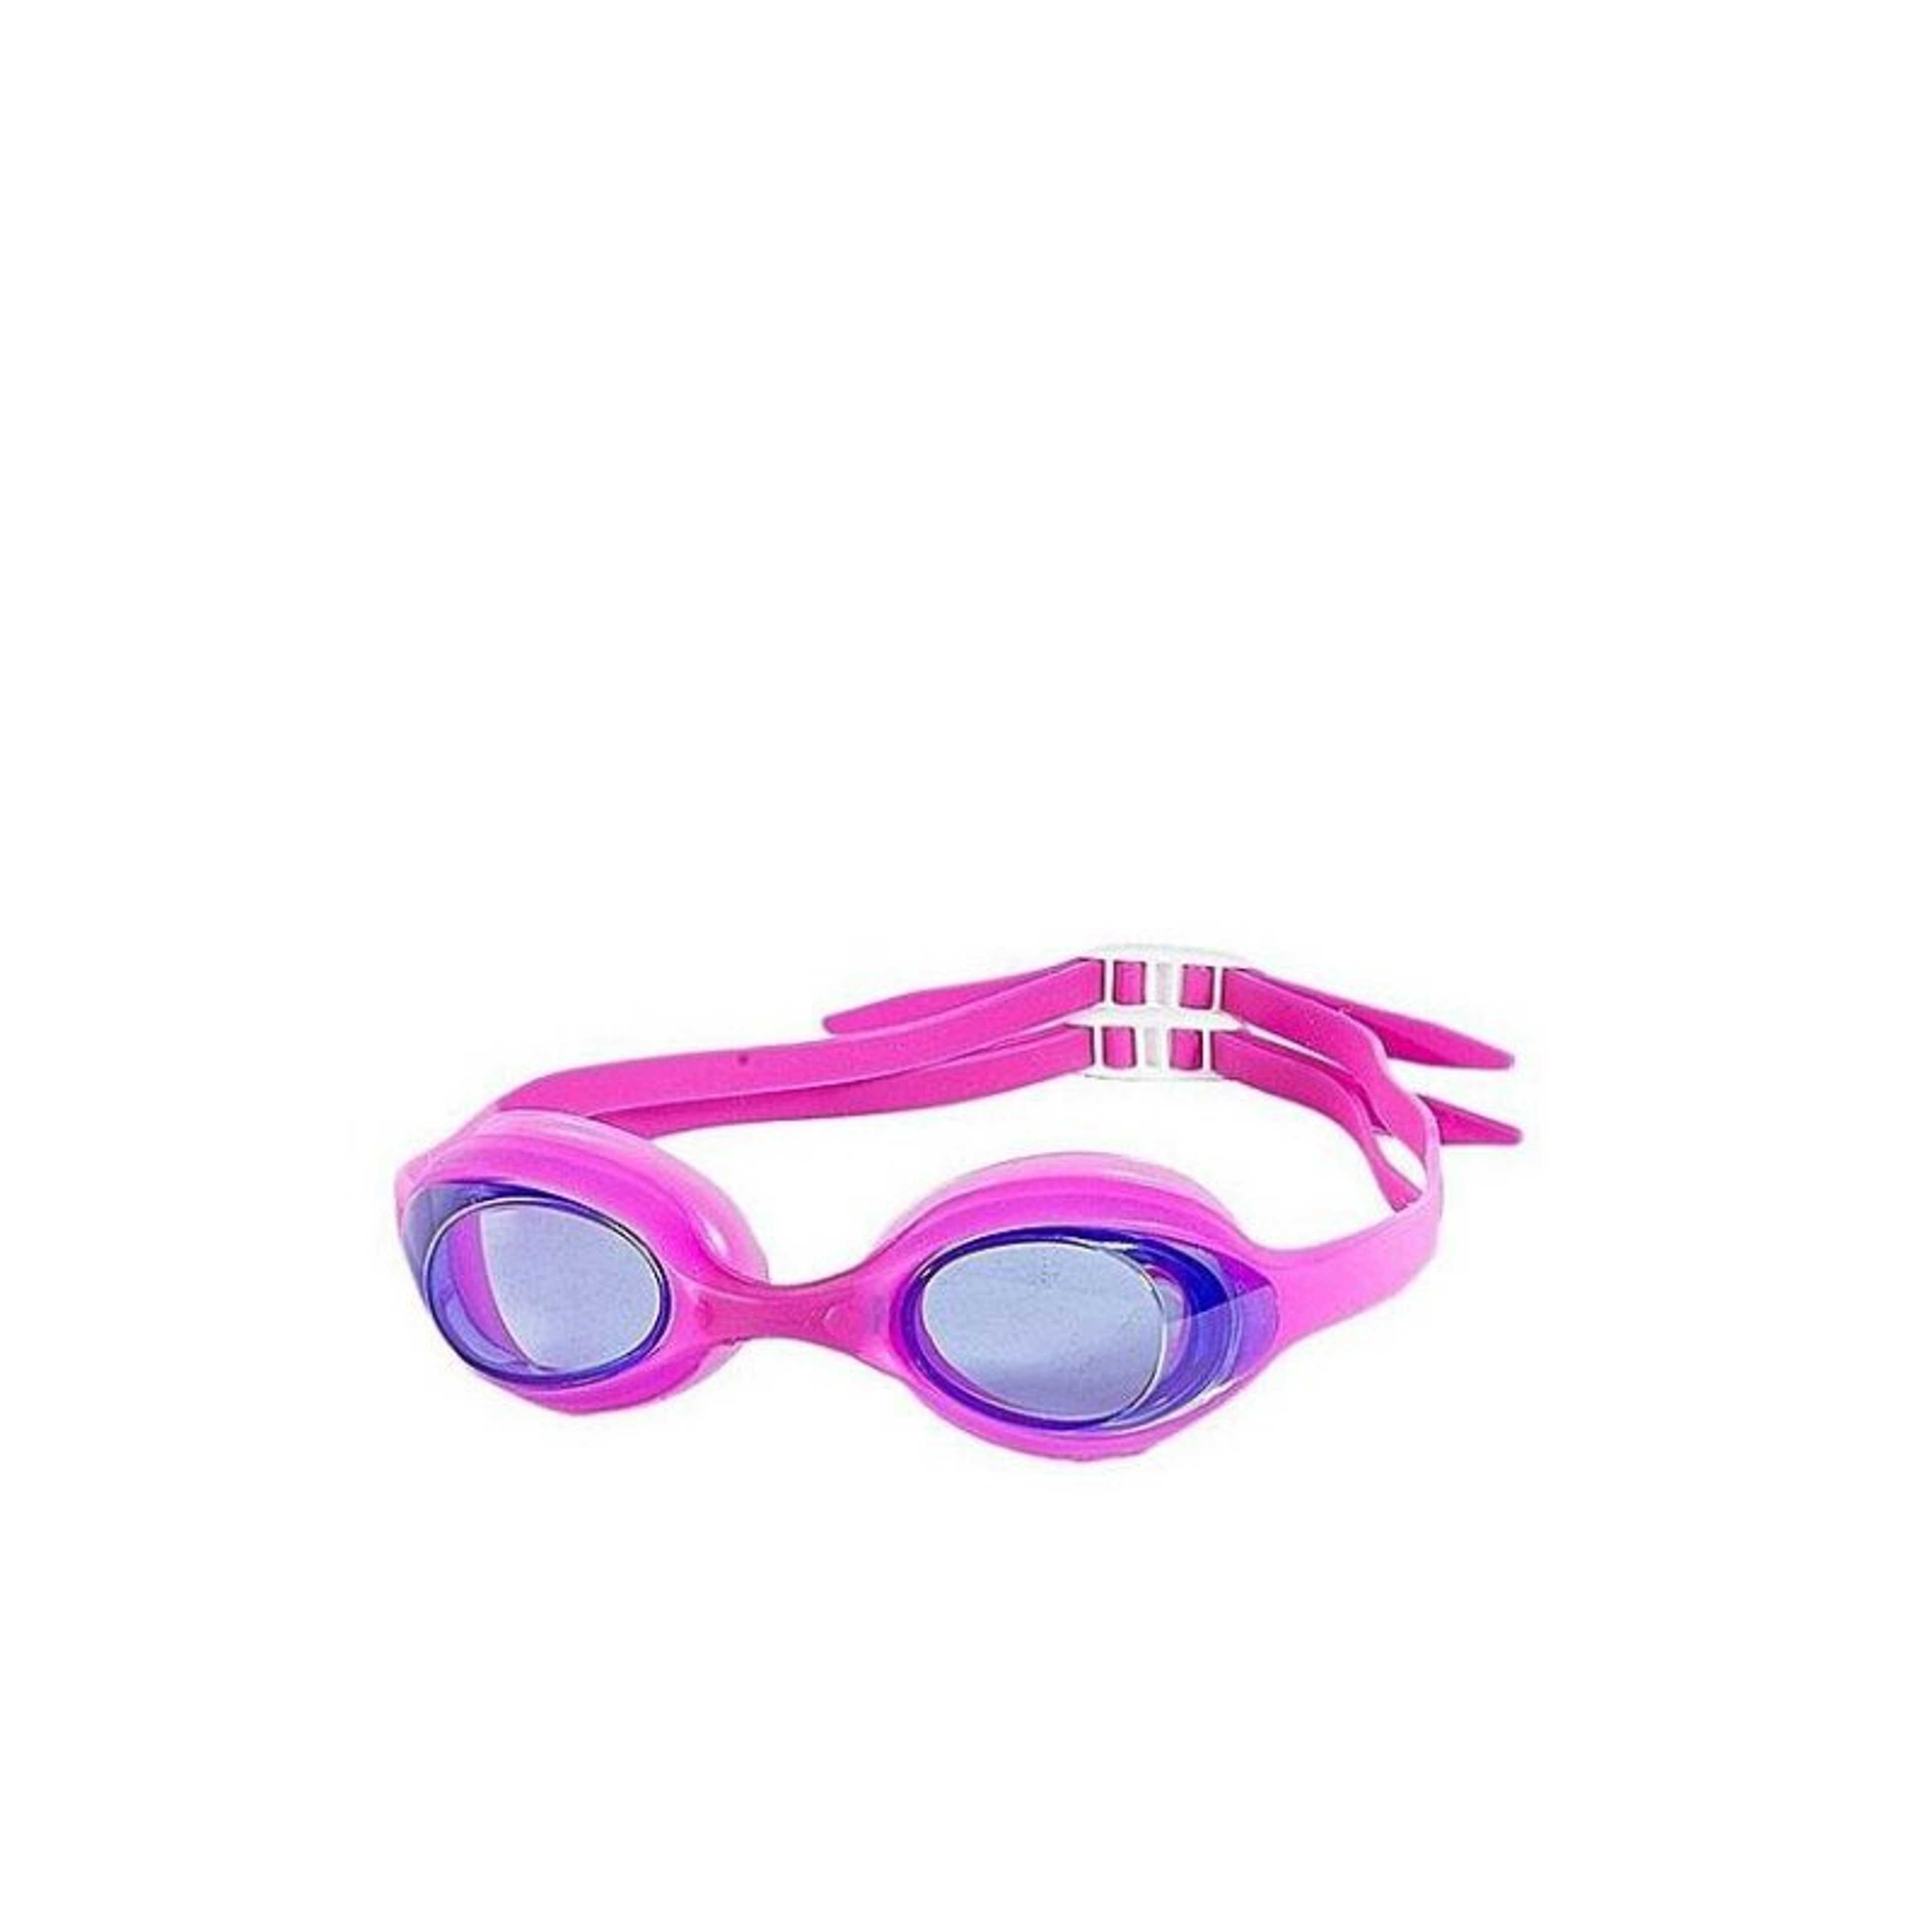 Grilong Swimming Goggle For Kids - Black